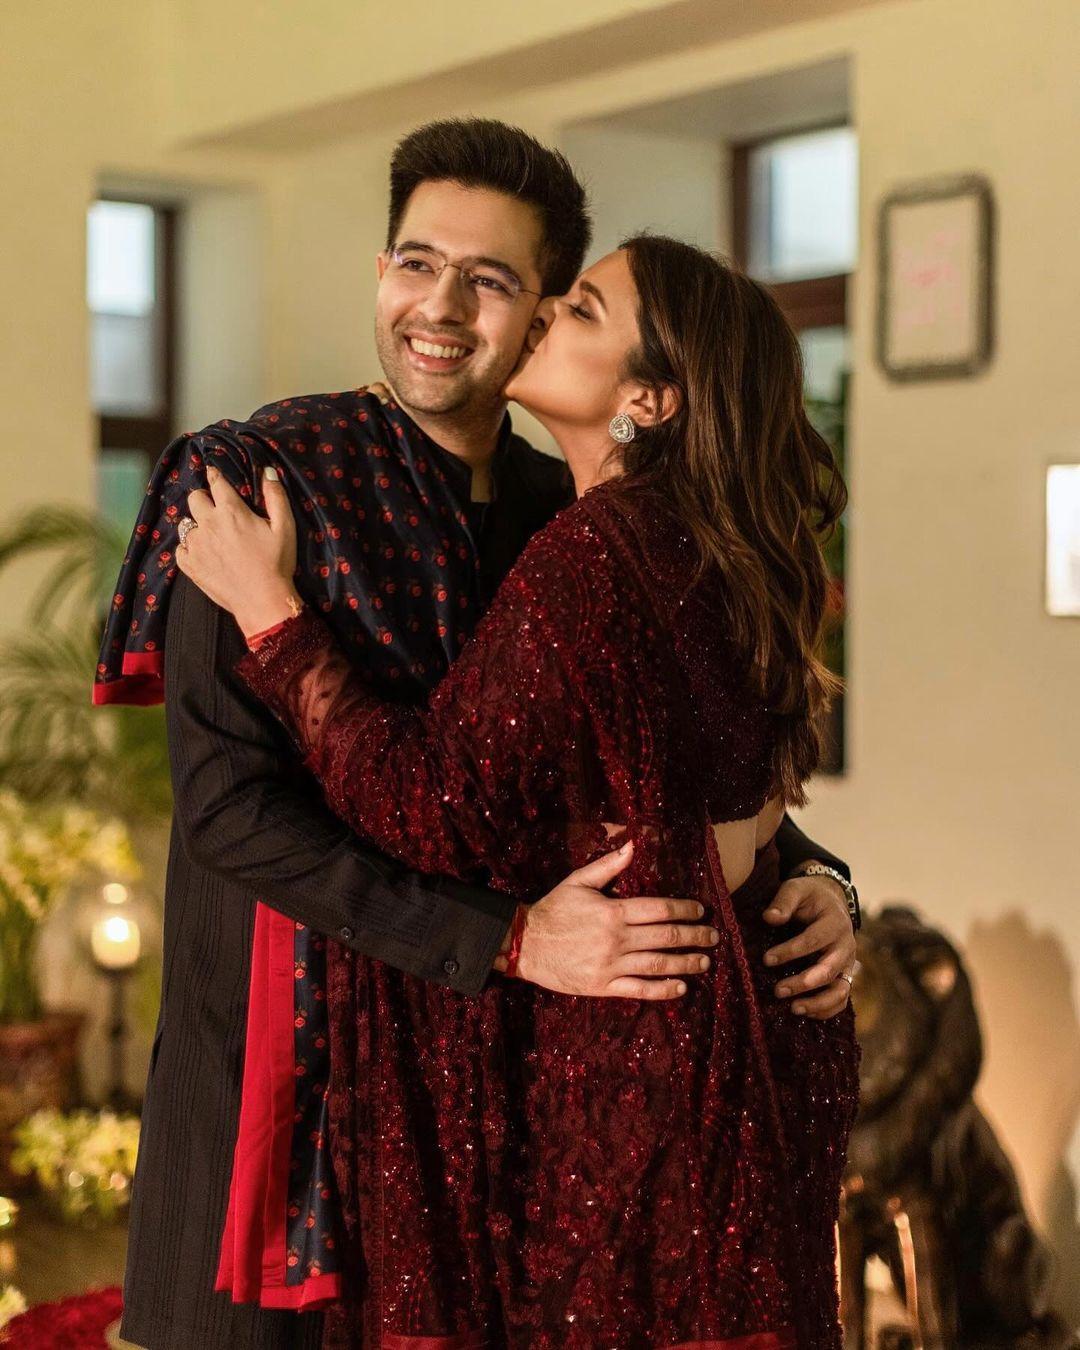 It's the first Holi for actress Parineeti Chopra and politician Raghav Chadha as a married couple